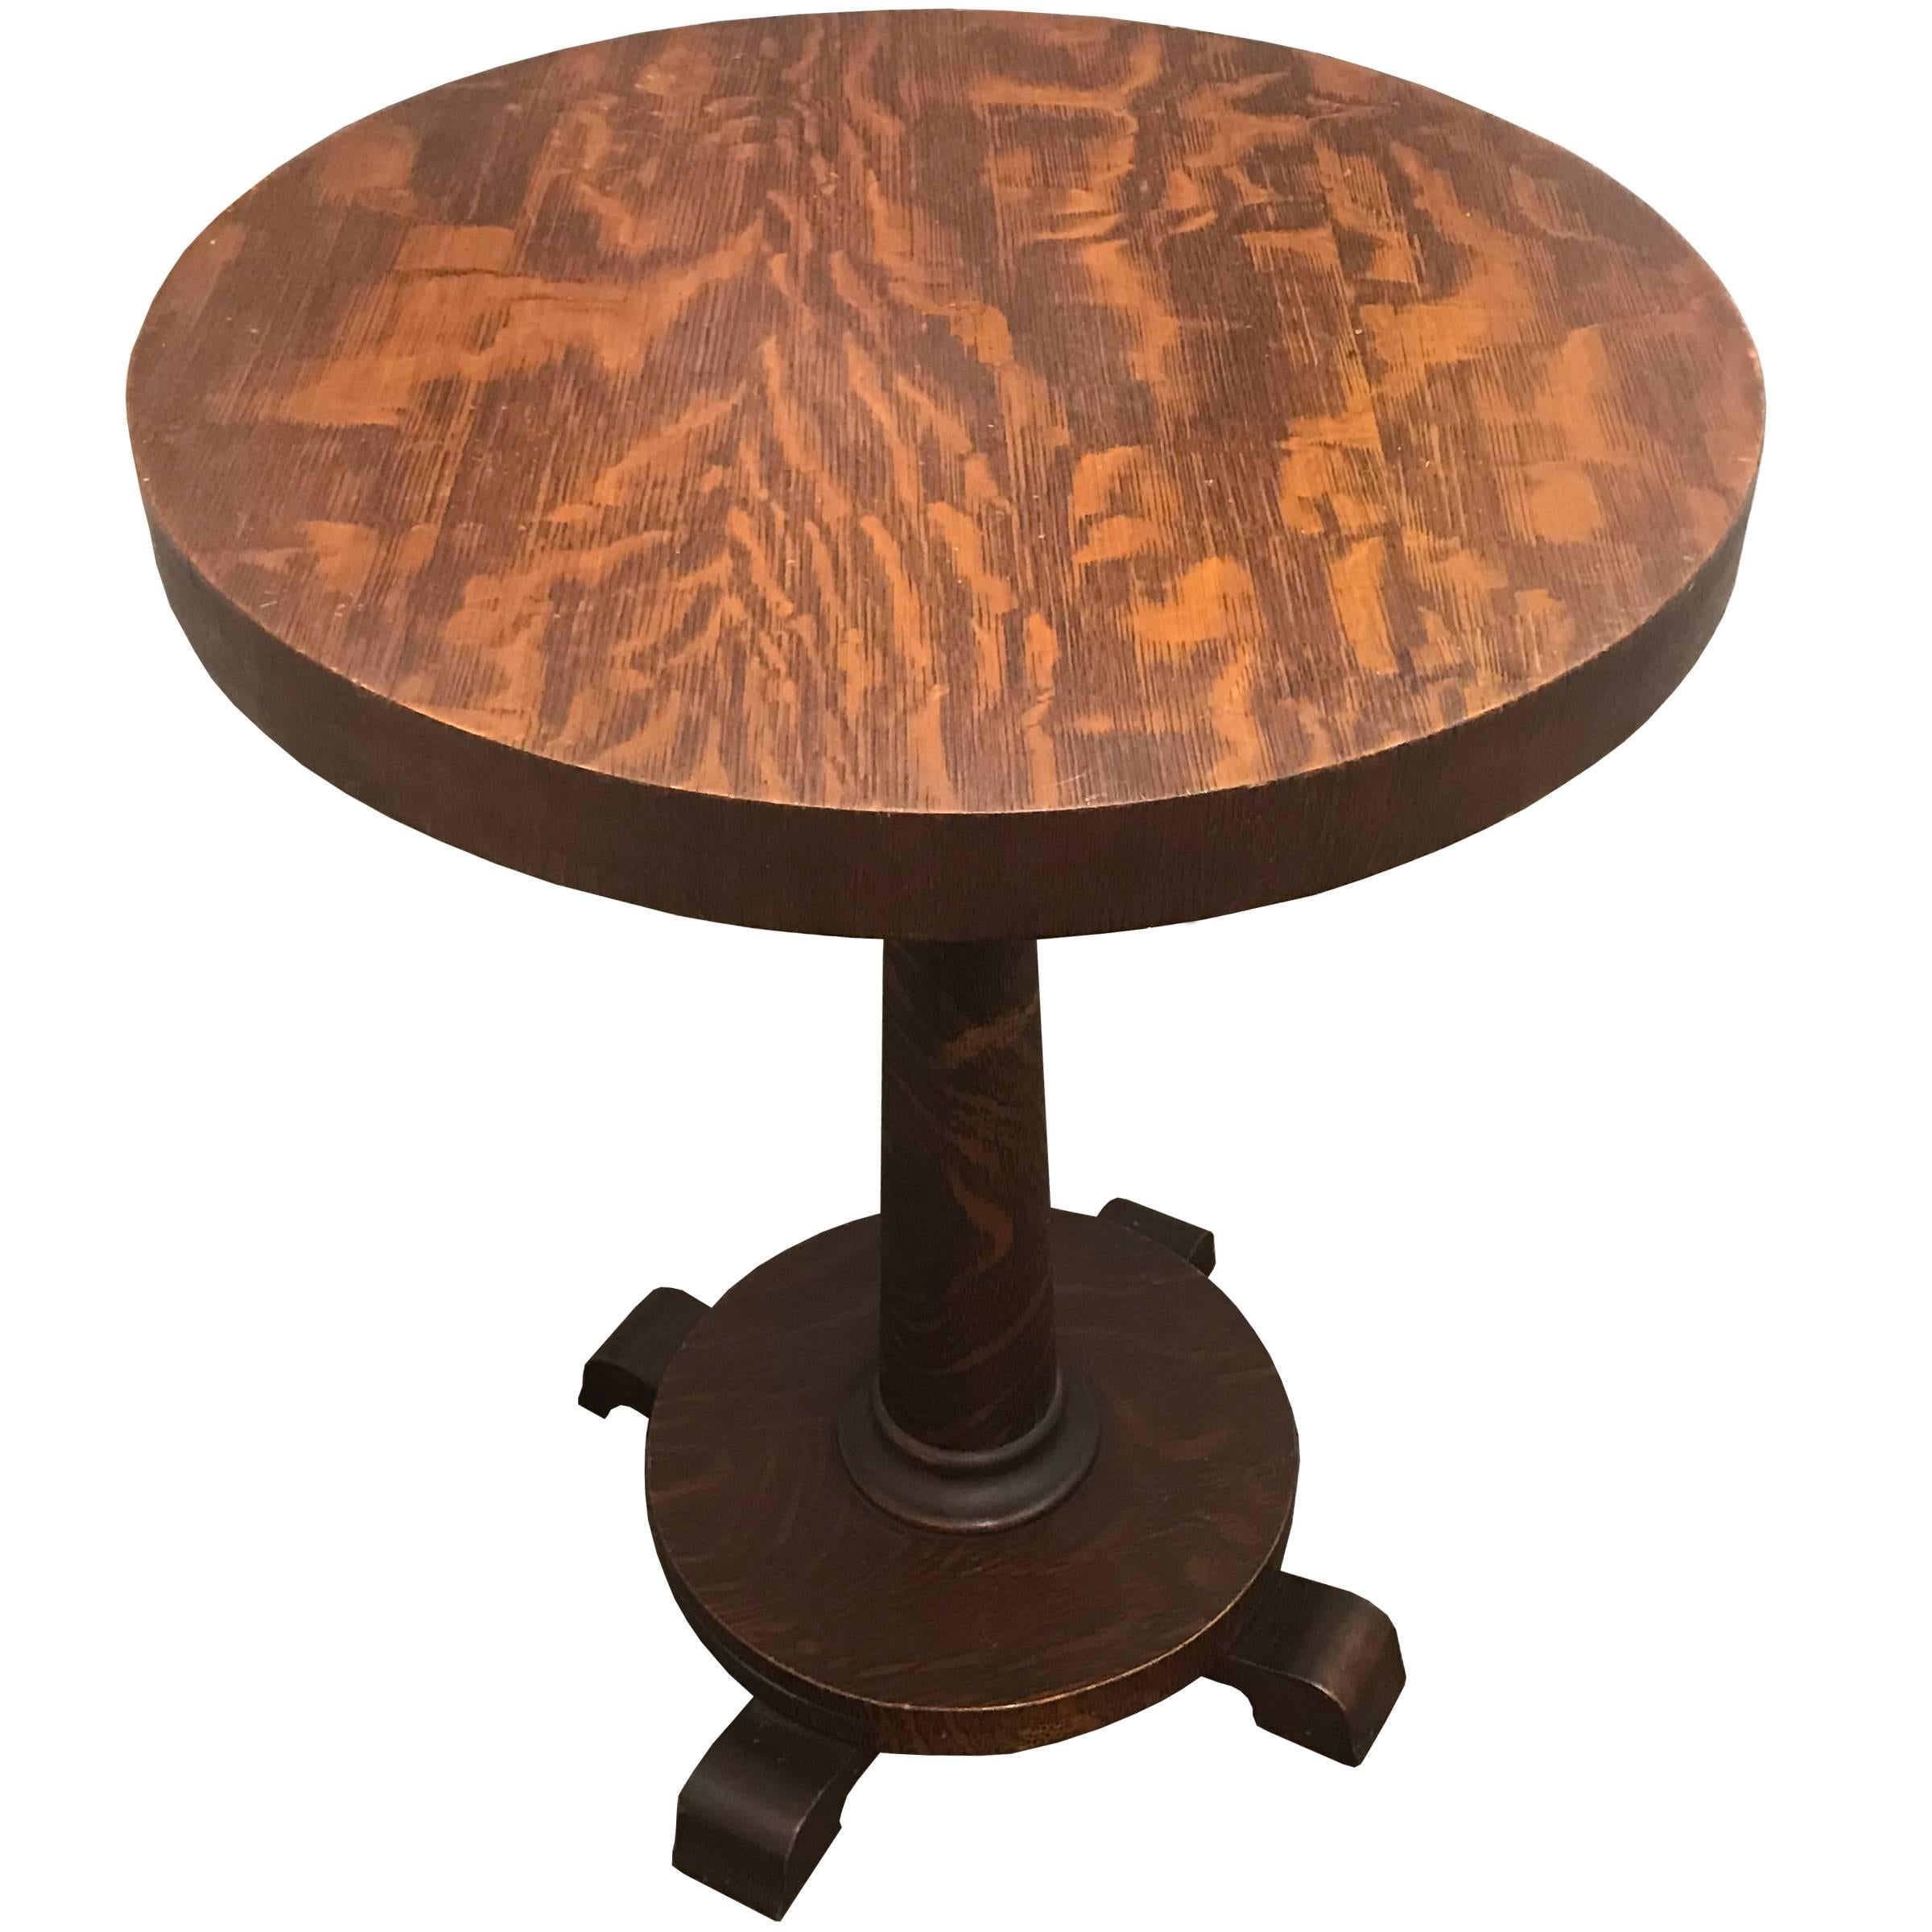 A charming early 20th century American side table with tiger oak veneer, round top, turned column, and round base with stylized pad feet. Found in Minnesota.